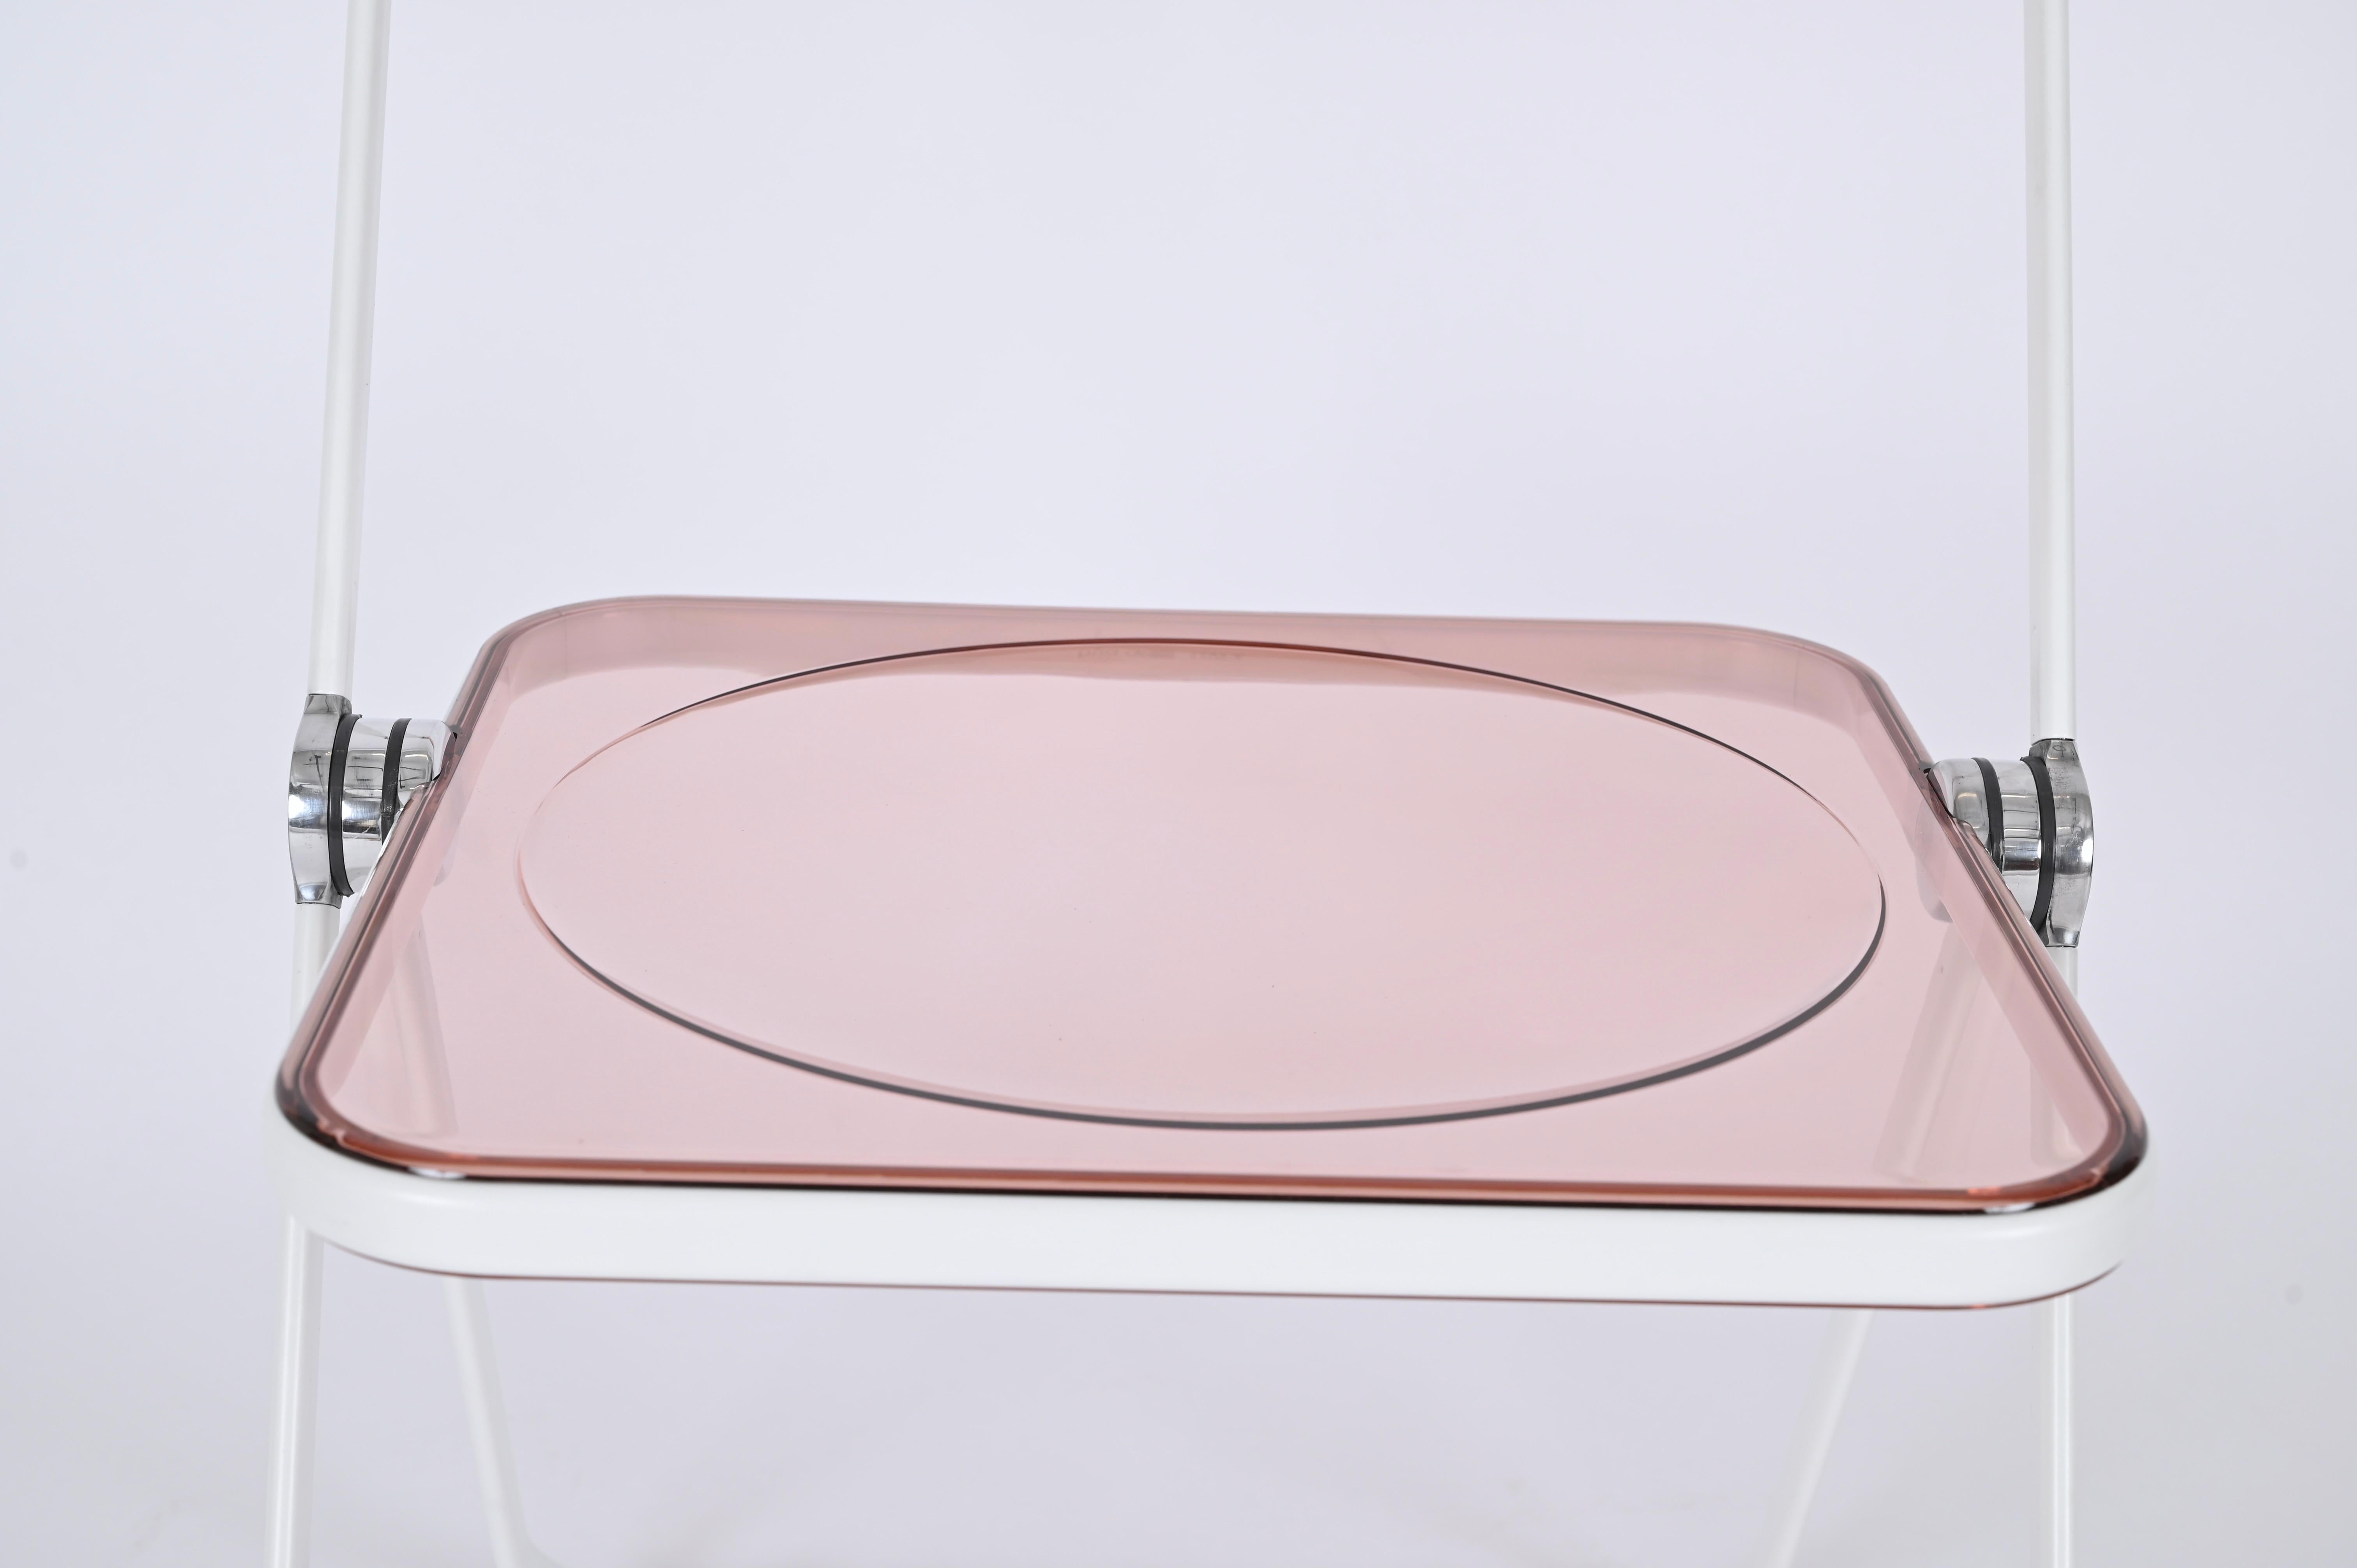 20th Century Giancarlo Piretti Lucite Pink and White Folding Plia Chairs for Castelli, 1970s For Sale